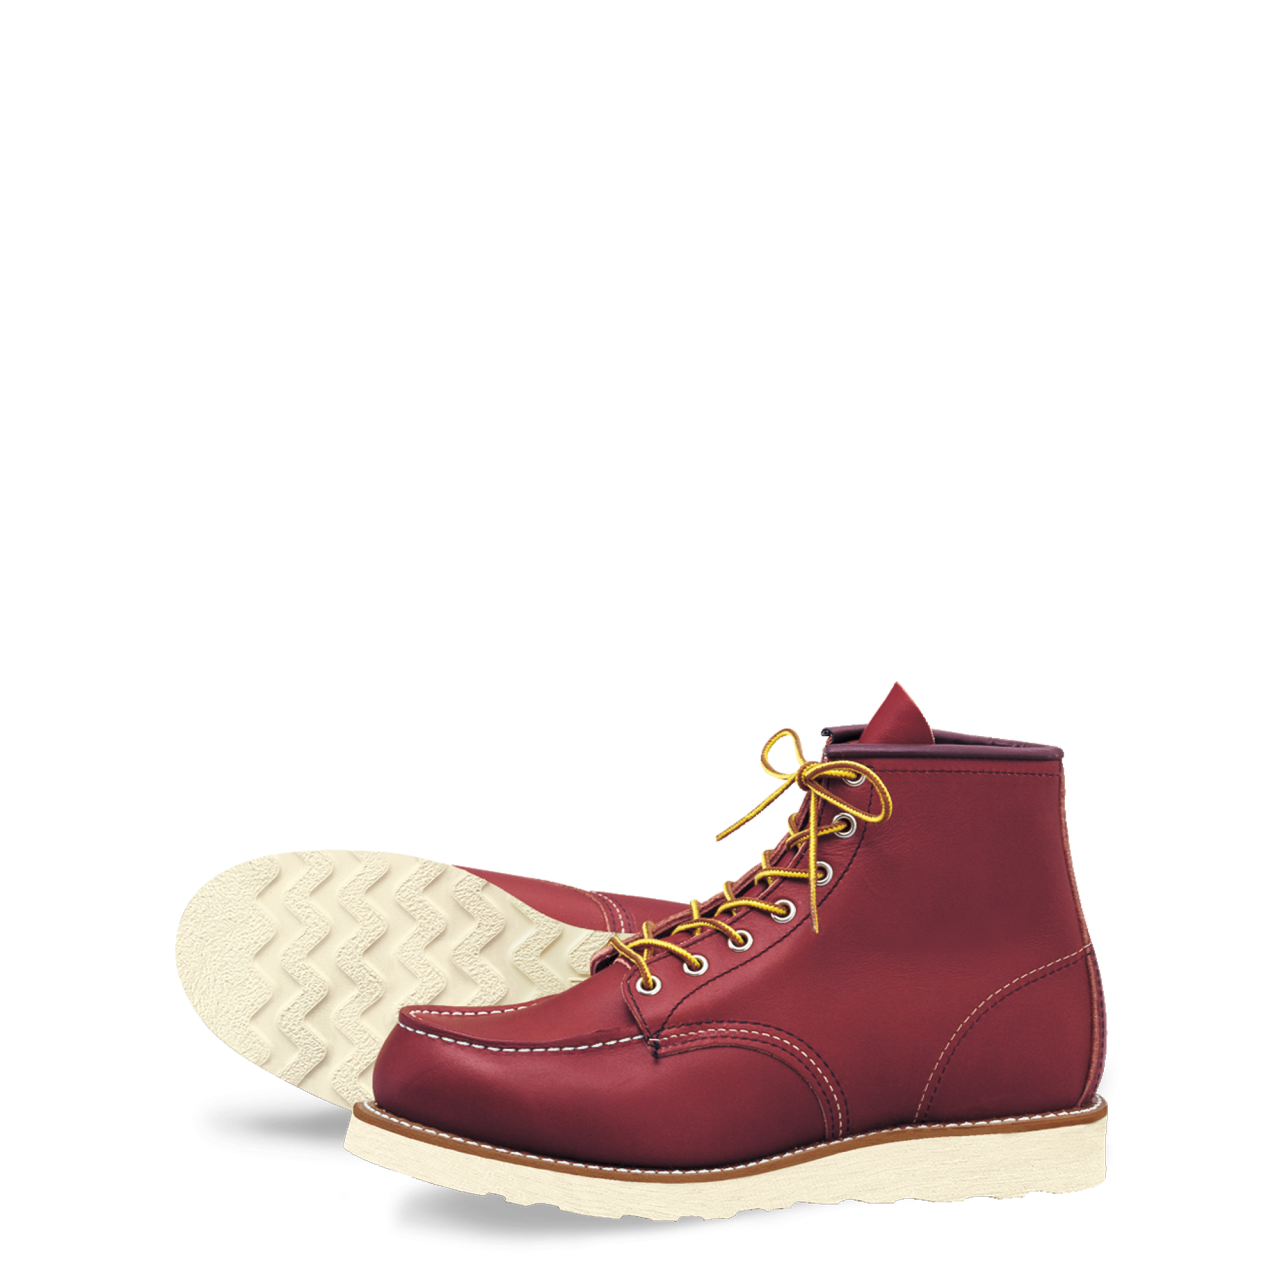 Red Wing 8875 Moc Toe